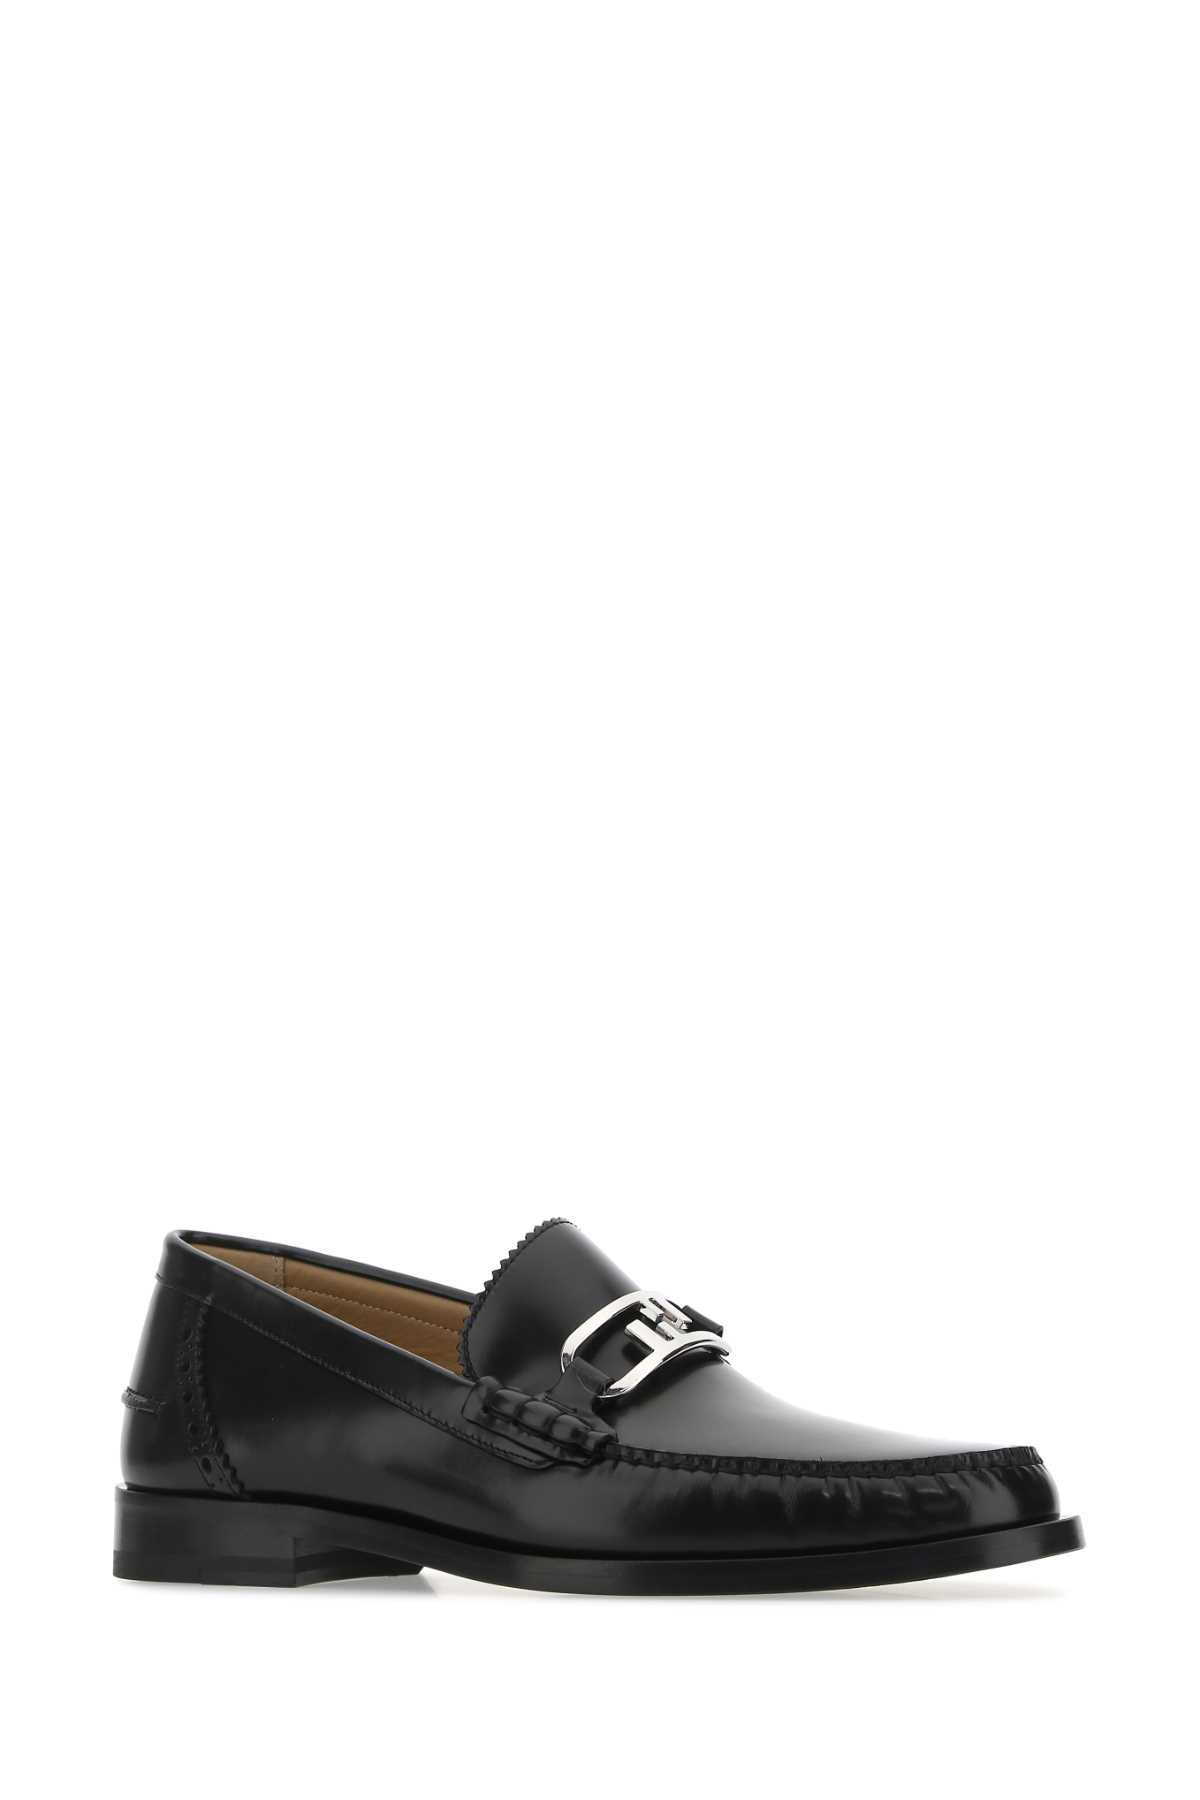 Shop Fendi Black Leather Loafers In F0abb